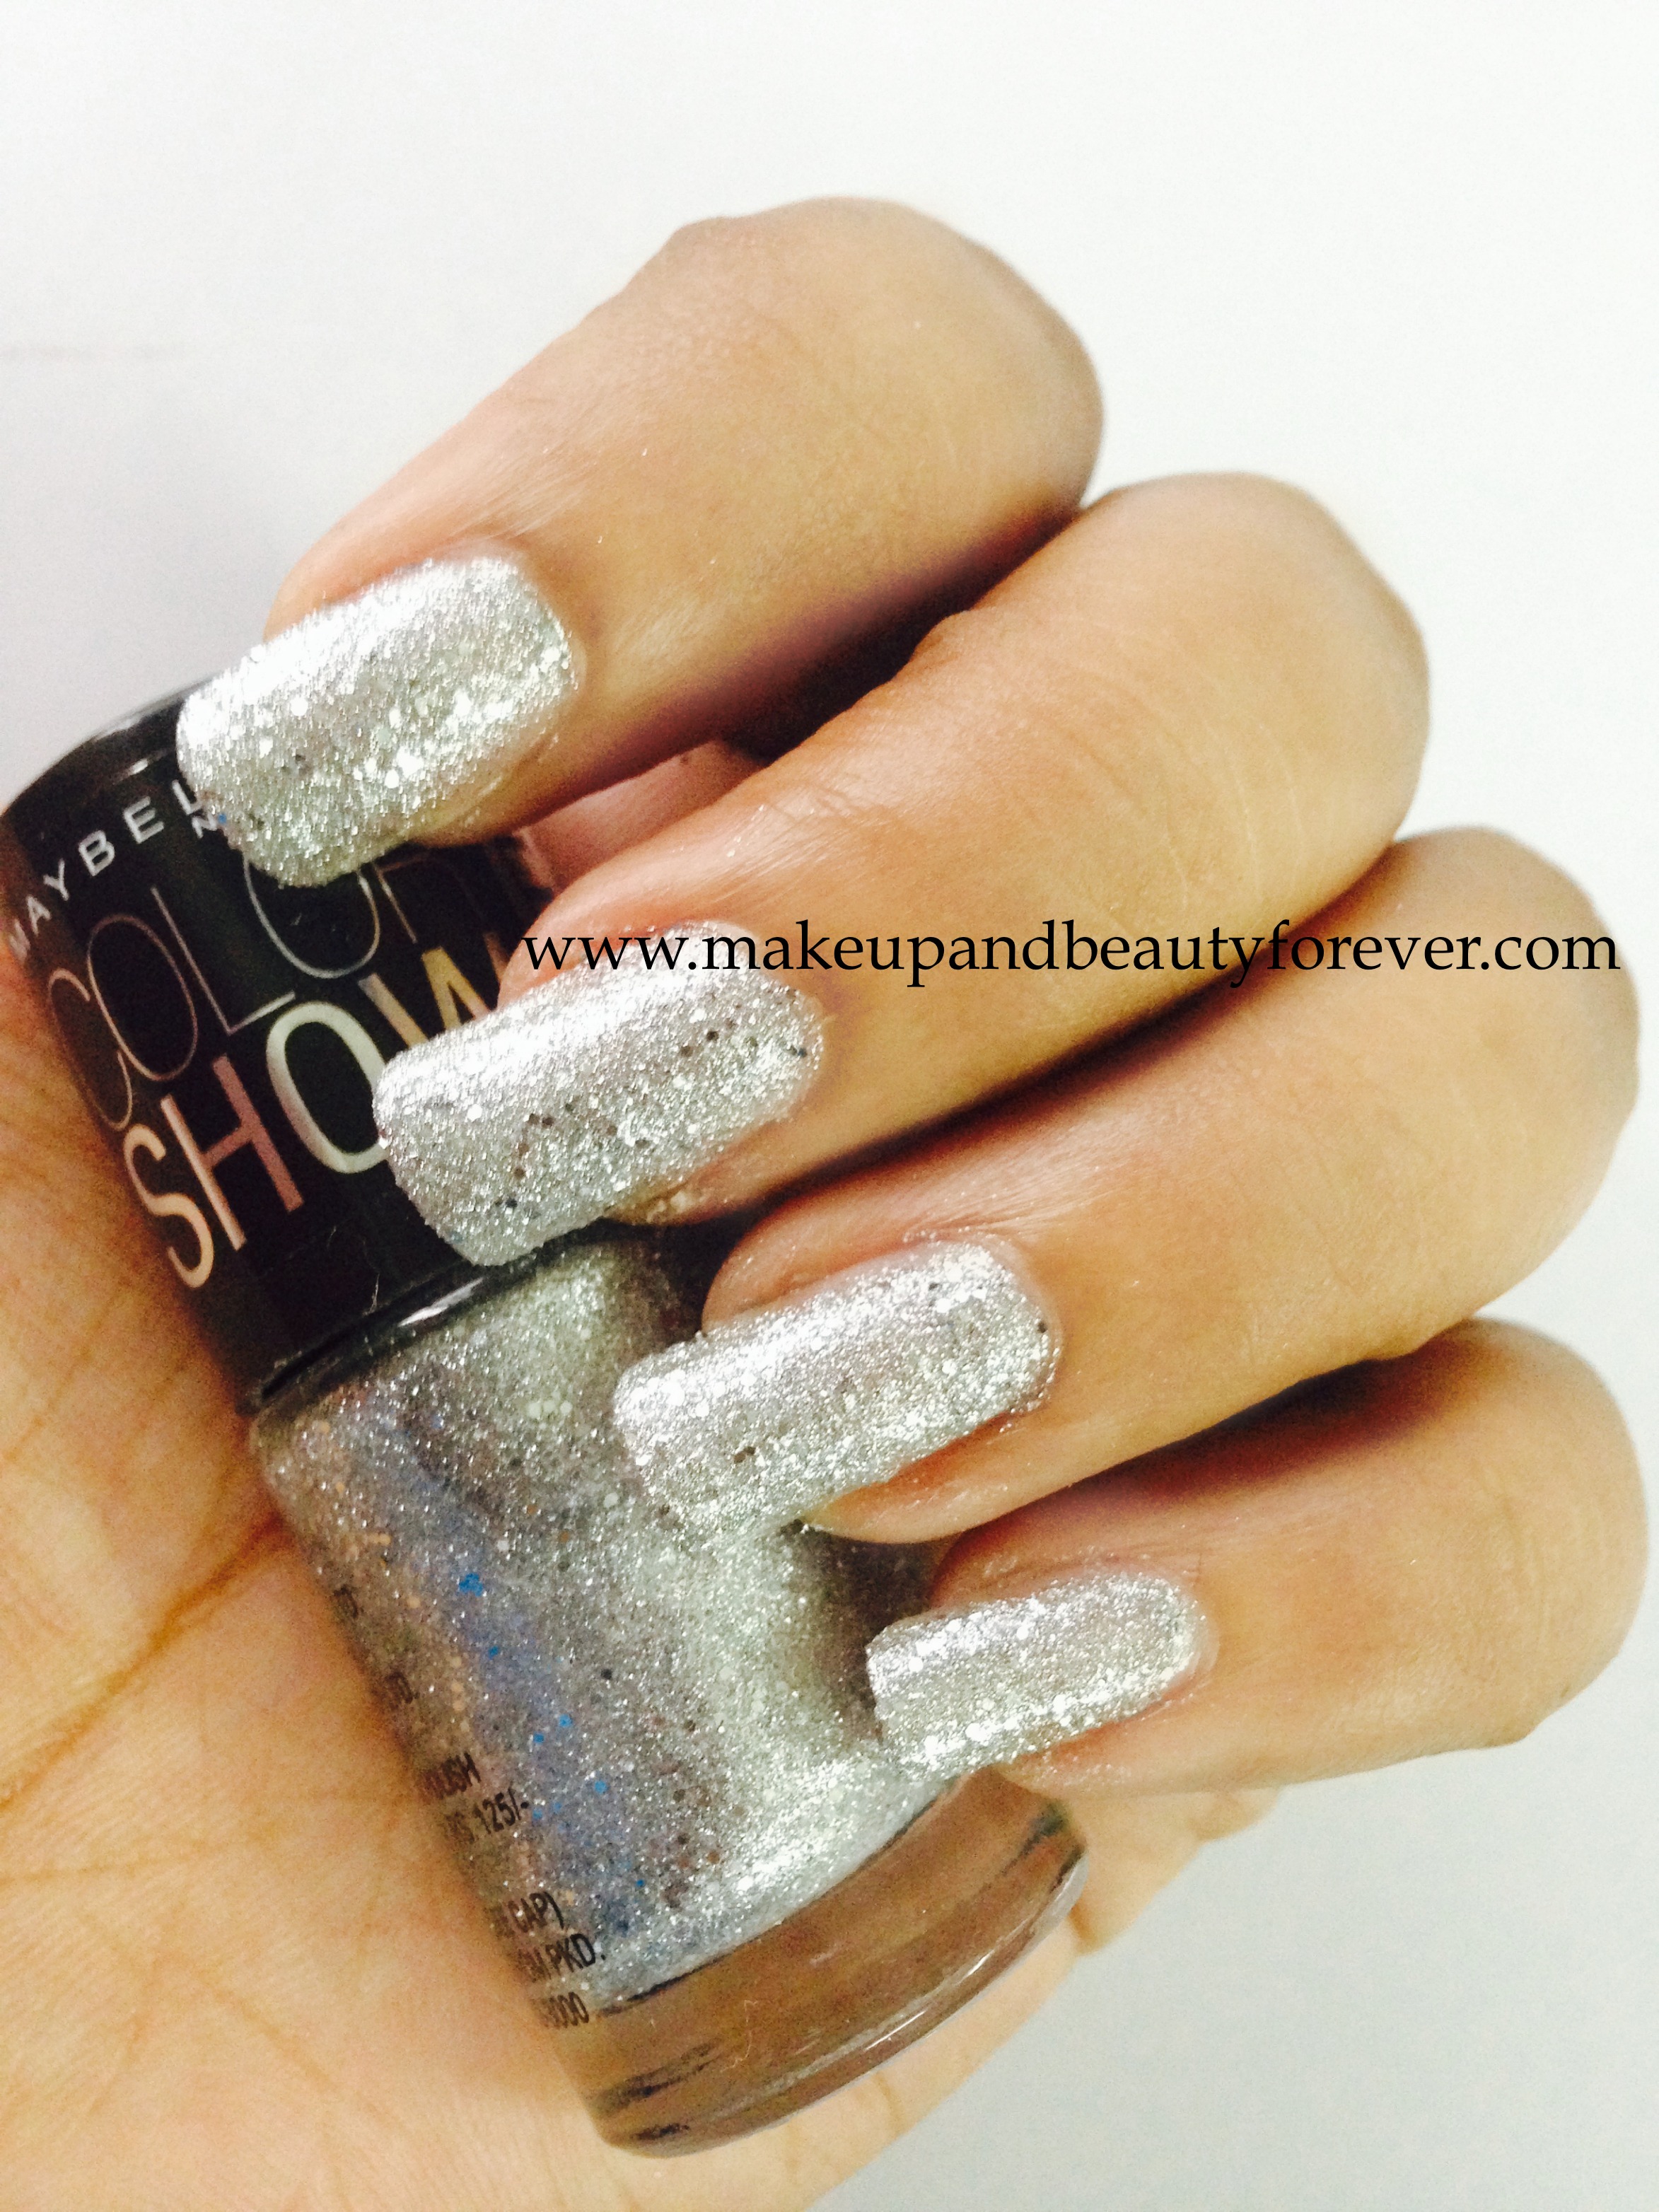 Maybelline Forever Strong Porcelain 78 Nail Polish | Sainsbury's